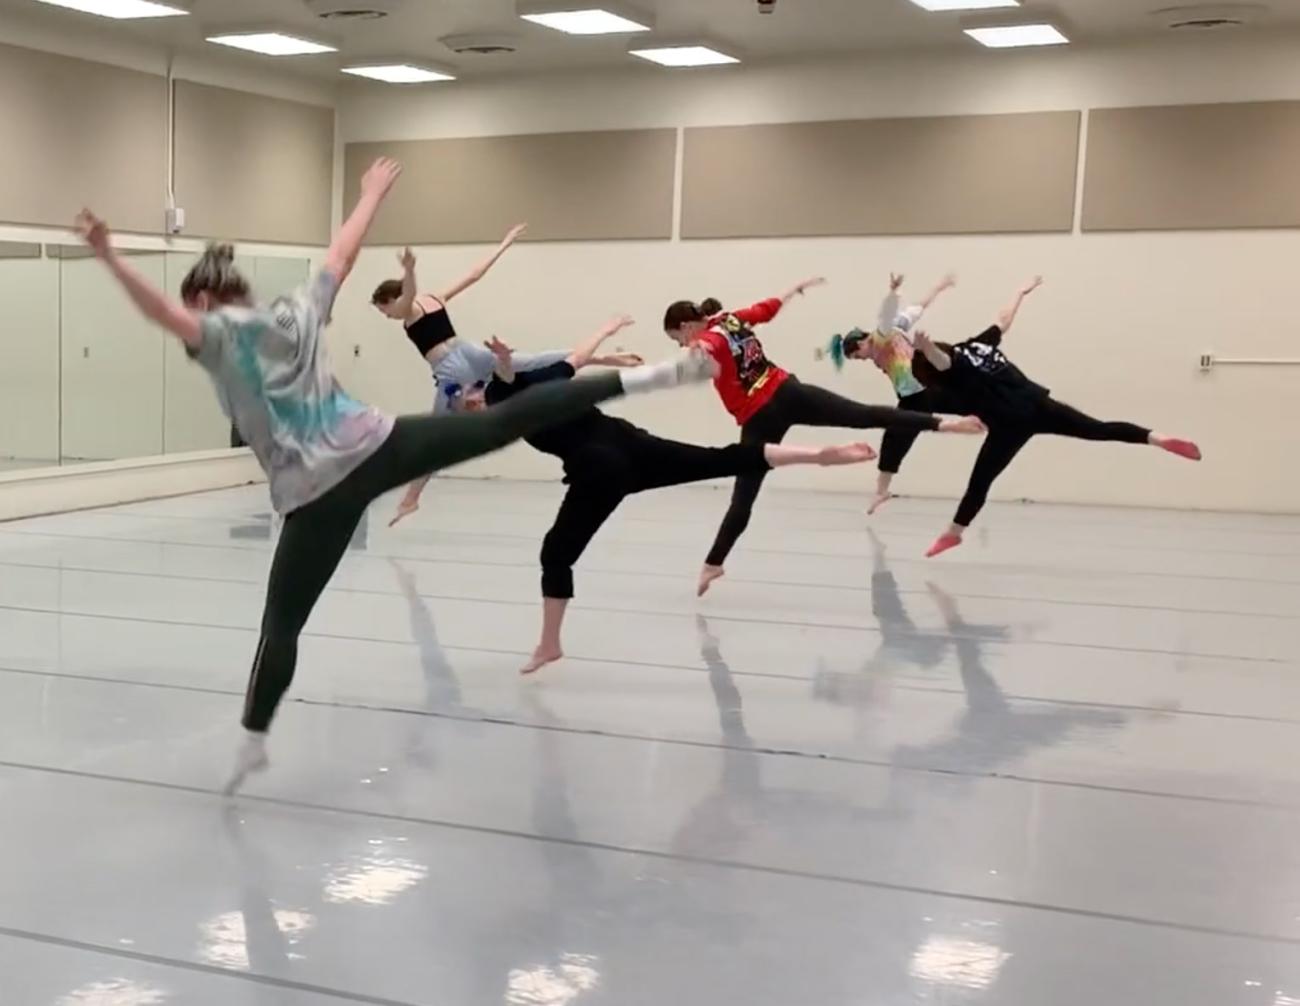 four dancers balance on one foot with back legs and arms extended